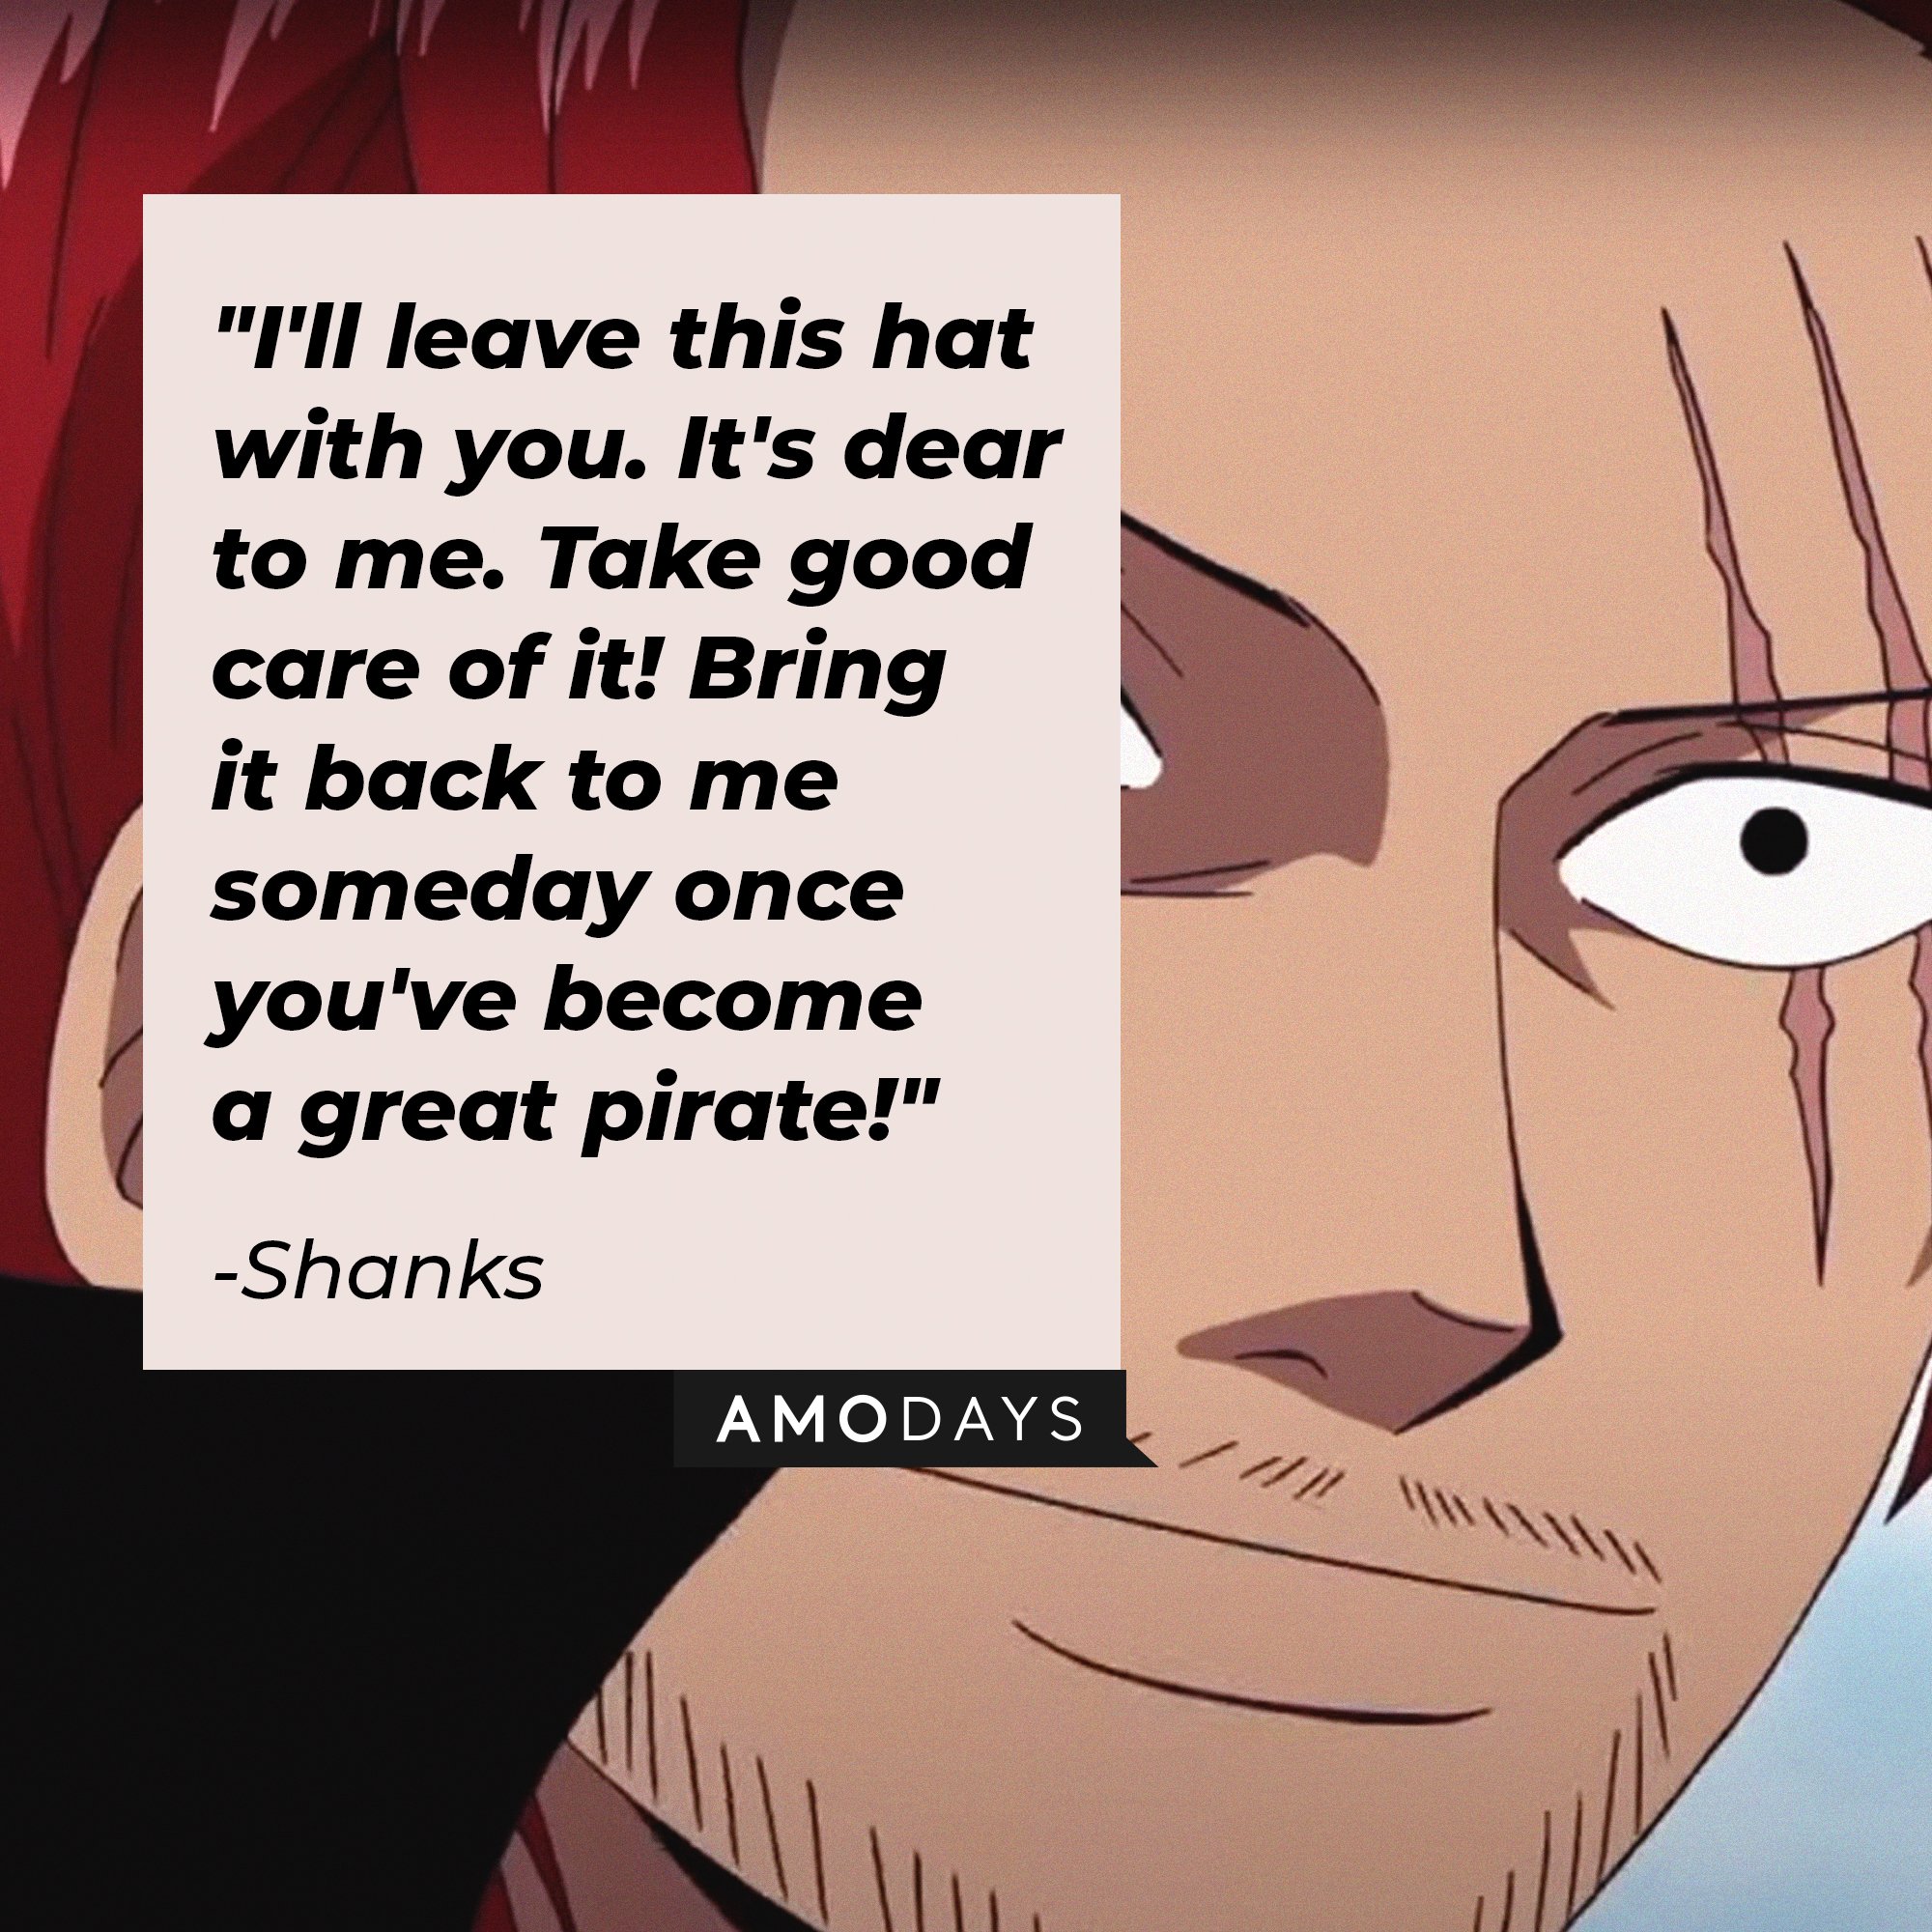 Shanks' quote: "I'll leave this hat with you. It's dear to me. Take good care of it! Bring it back to me someday once you've become a great pirate!" | Image: AmoDays